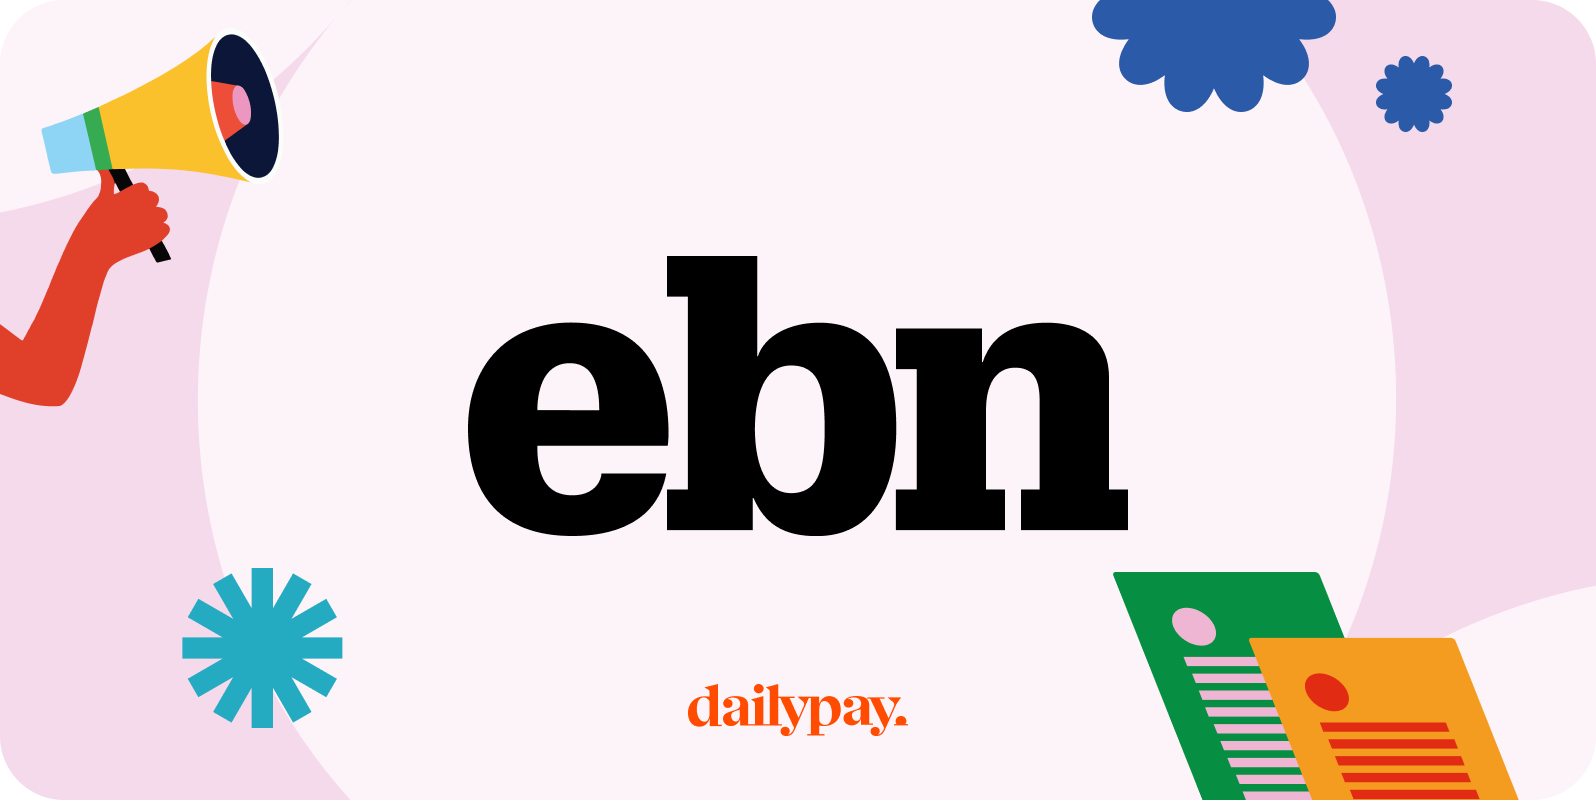 A graphic featuring the acronym "ebn" in bold black text. Surrounding it are various colorful elements including a hand holding a megaphone, scattered shapes, and documents. The word "dailypay" appears below.